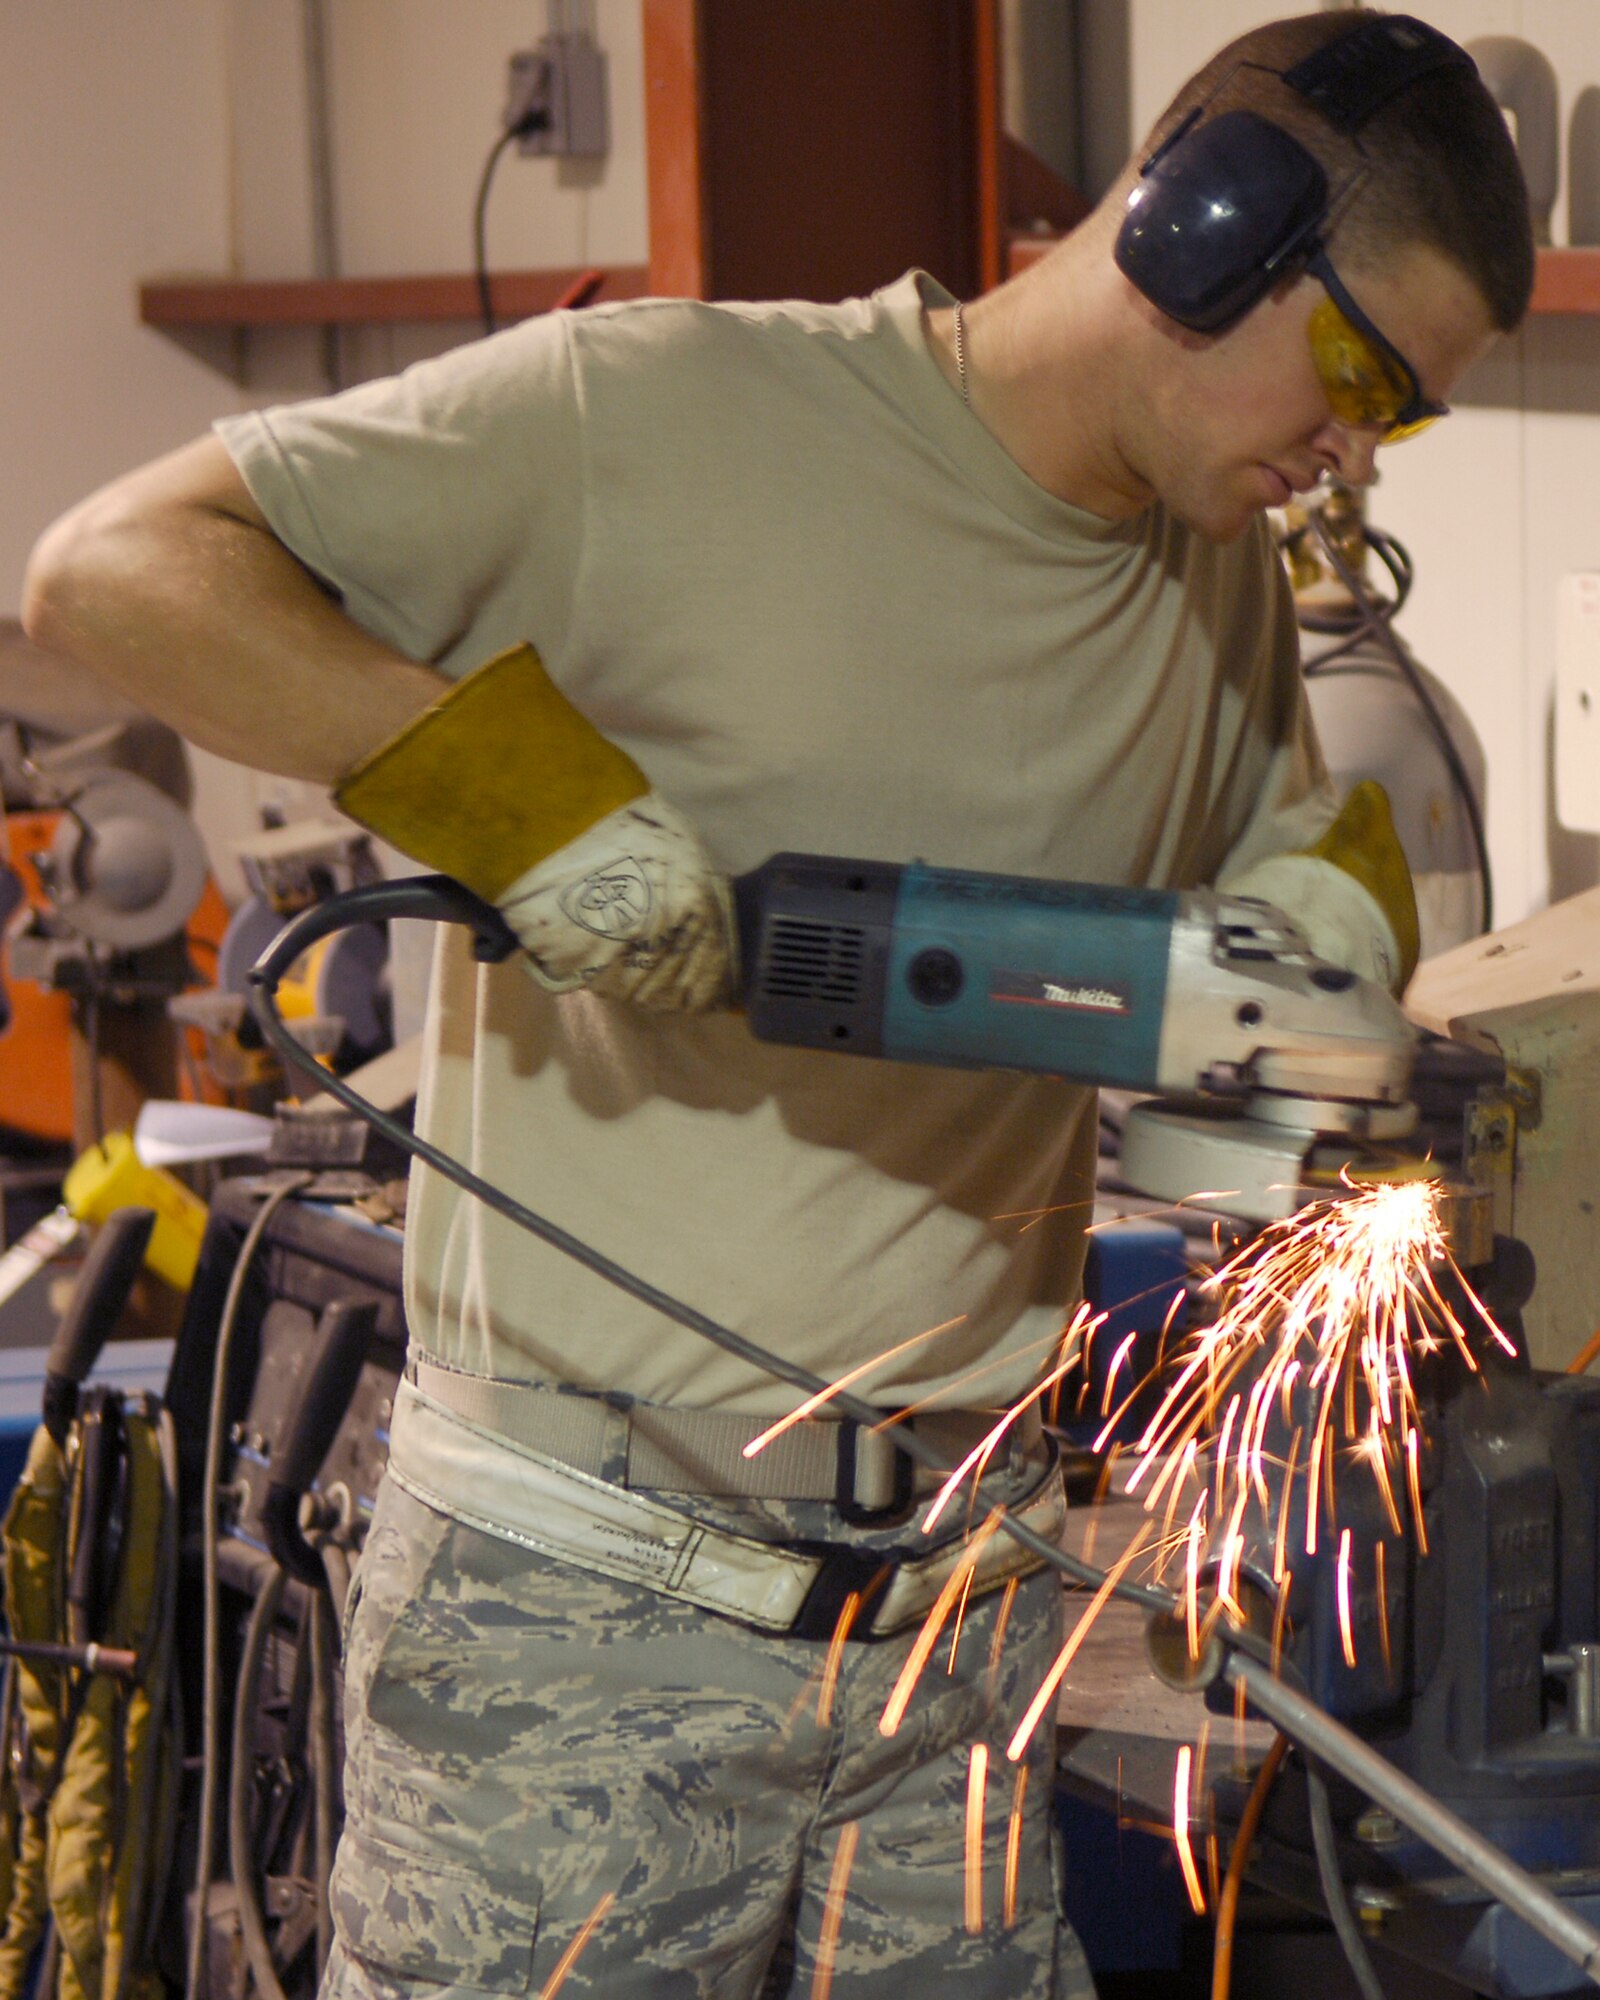 BALAD AIR BASE, Iraq -- Sparks fly as Senior Airman Zach Jones, a structural maintenance welder assigned to the 332nd Expeditionary Aircraft Maintenance Squadron Fabrication Flight, uses a power saw to manipulate a piece of metal here, June 10. The structural maintenance Airmen are responsible for maintaining and repairing anything pertaining to the structure of aircraft, such as wings, panels and hinges. More than 50 active-duty, Reserve and Air National Guard Airmen run the Fabrication Flight shop 24/7 and complete more than 1,400 jobs monthly. Airmen Jones is deployed from Shaw Air Force Base, S.C.  (U.S. Air Force photo /Staff Sgt. John Ayre)